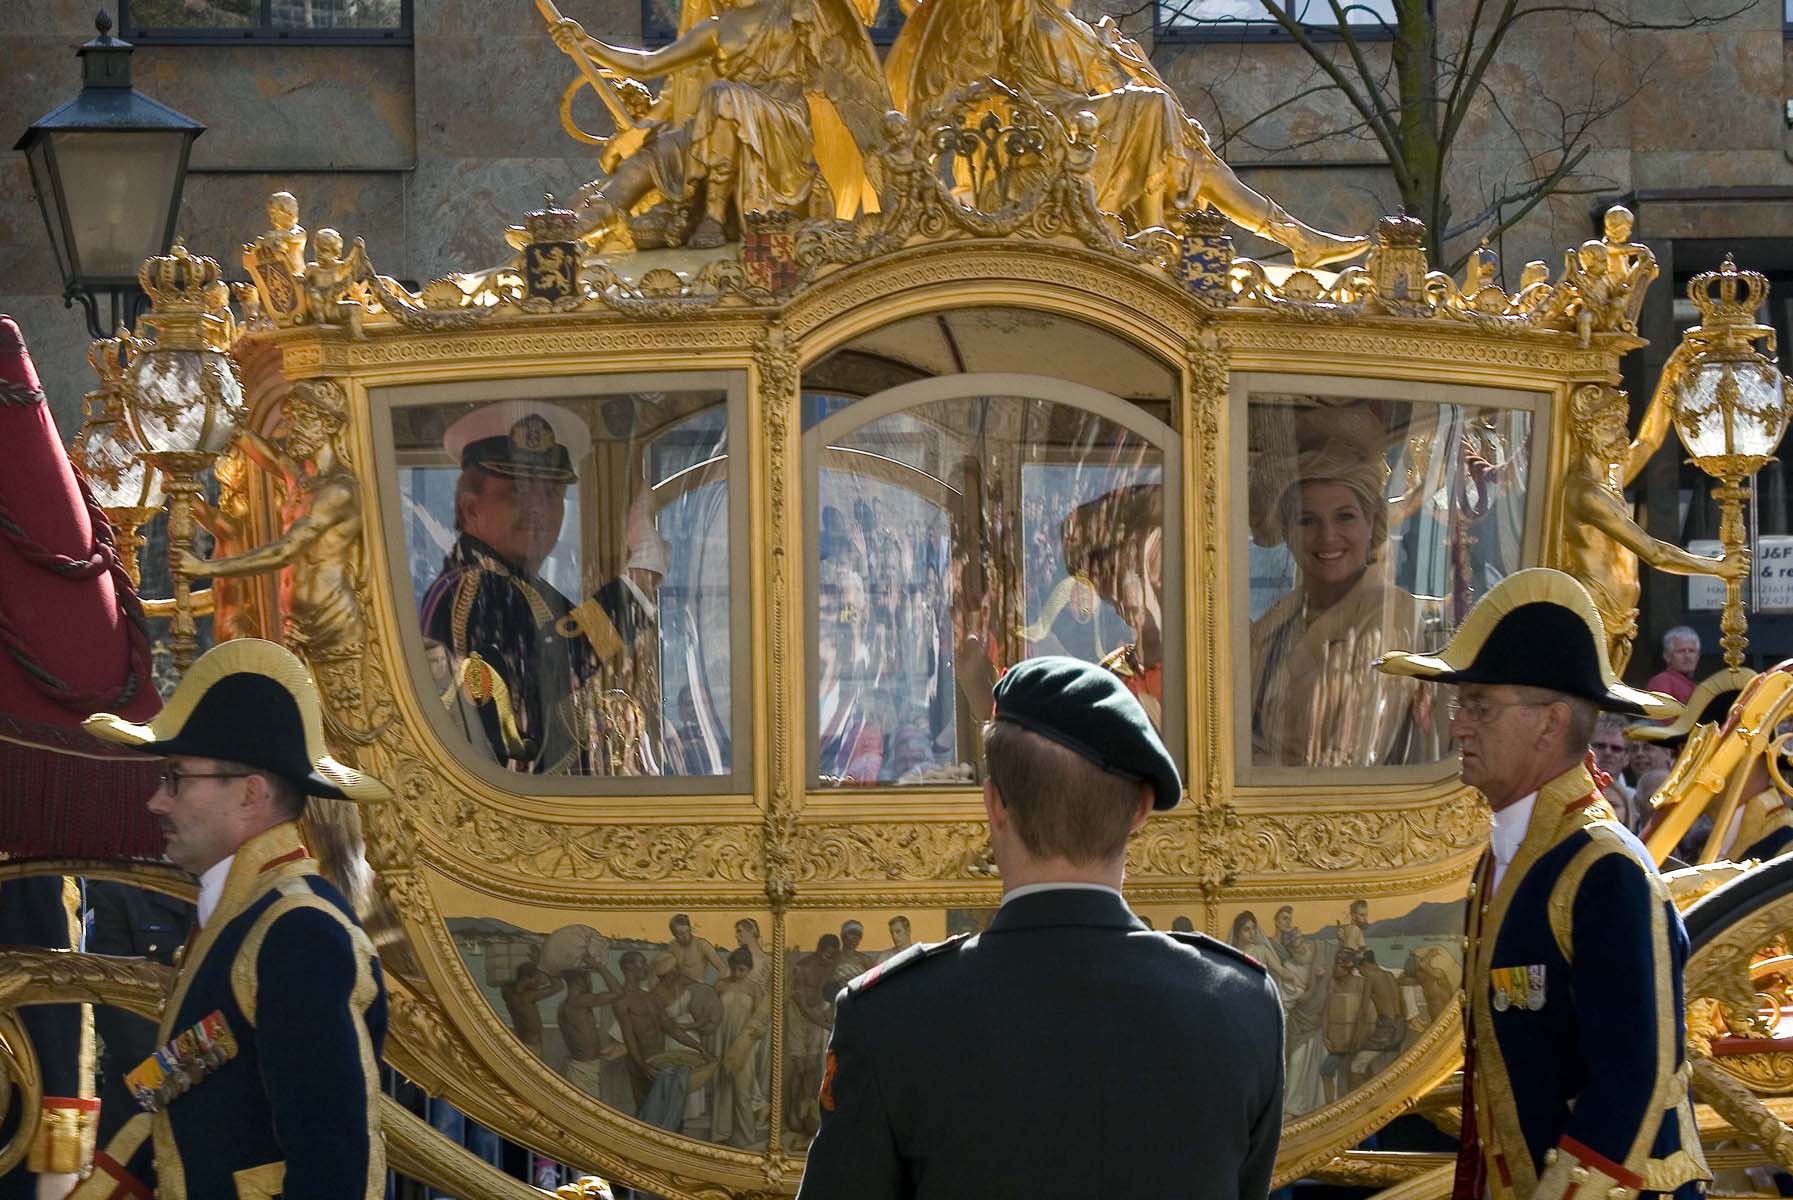 image of the Golden Coach with royalty inside - By Toni - originally posted to Flickr as the dutch royal family loves me!, CC BY 2.0, https://commons.wikimedia.org/w/index.php?curid=6512699